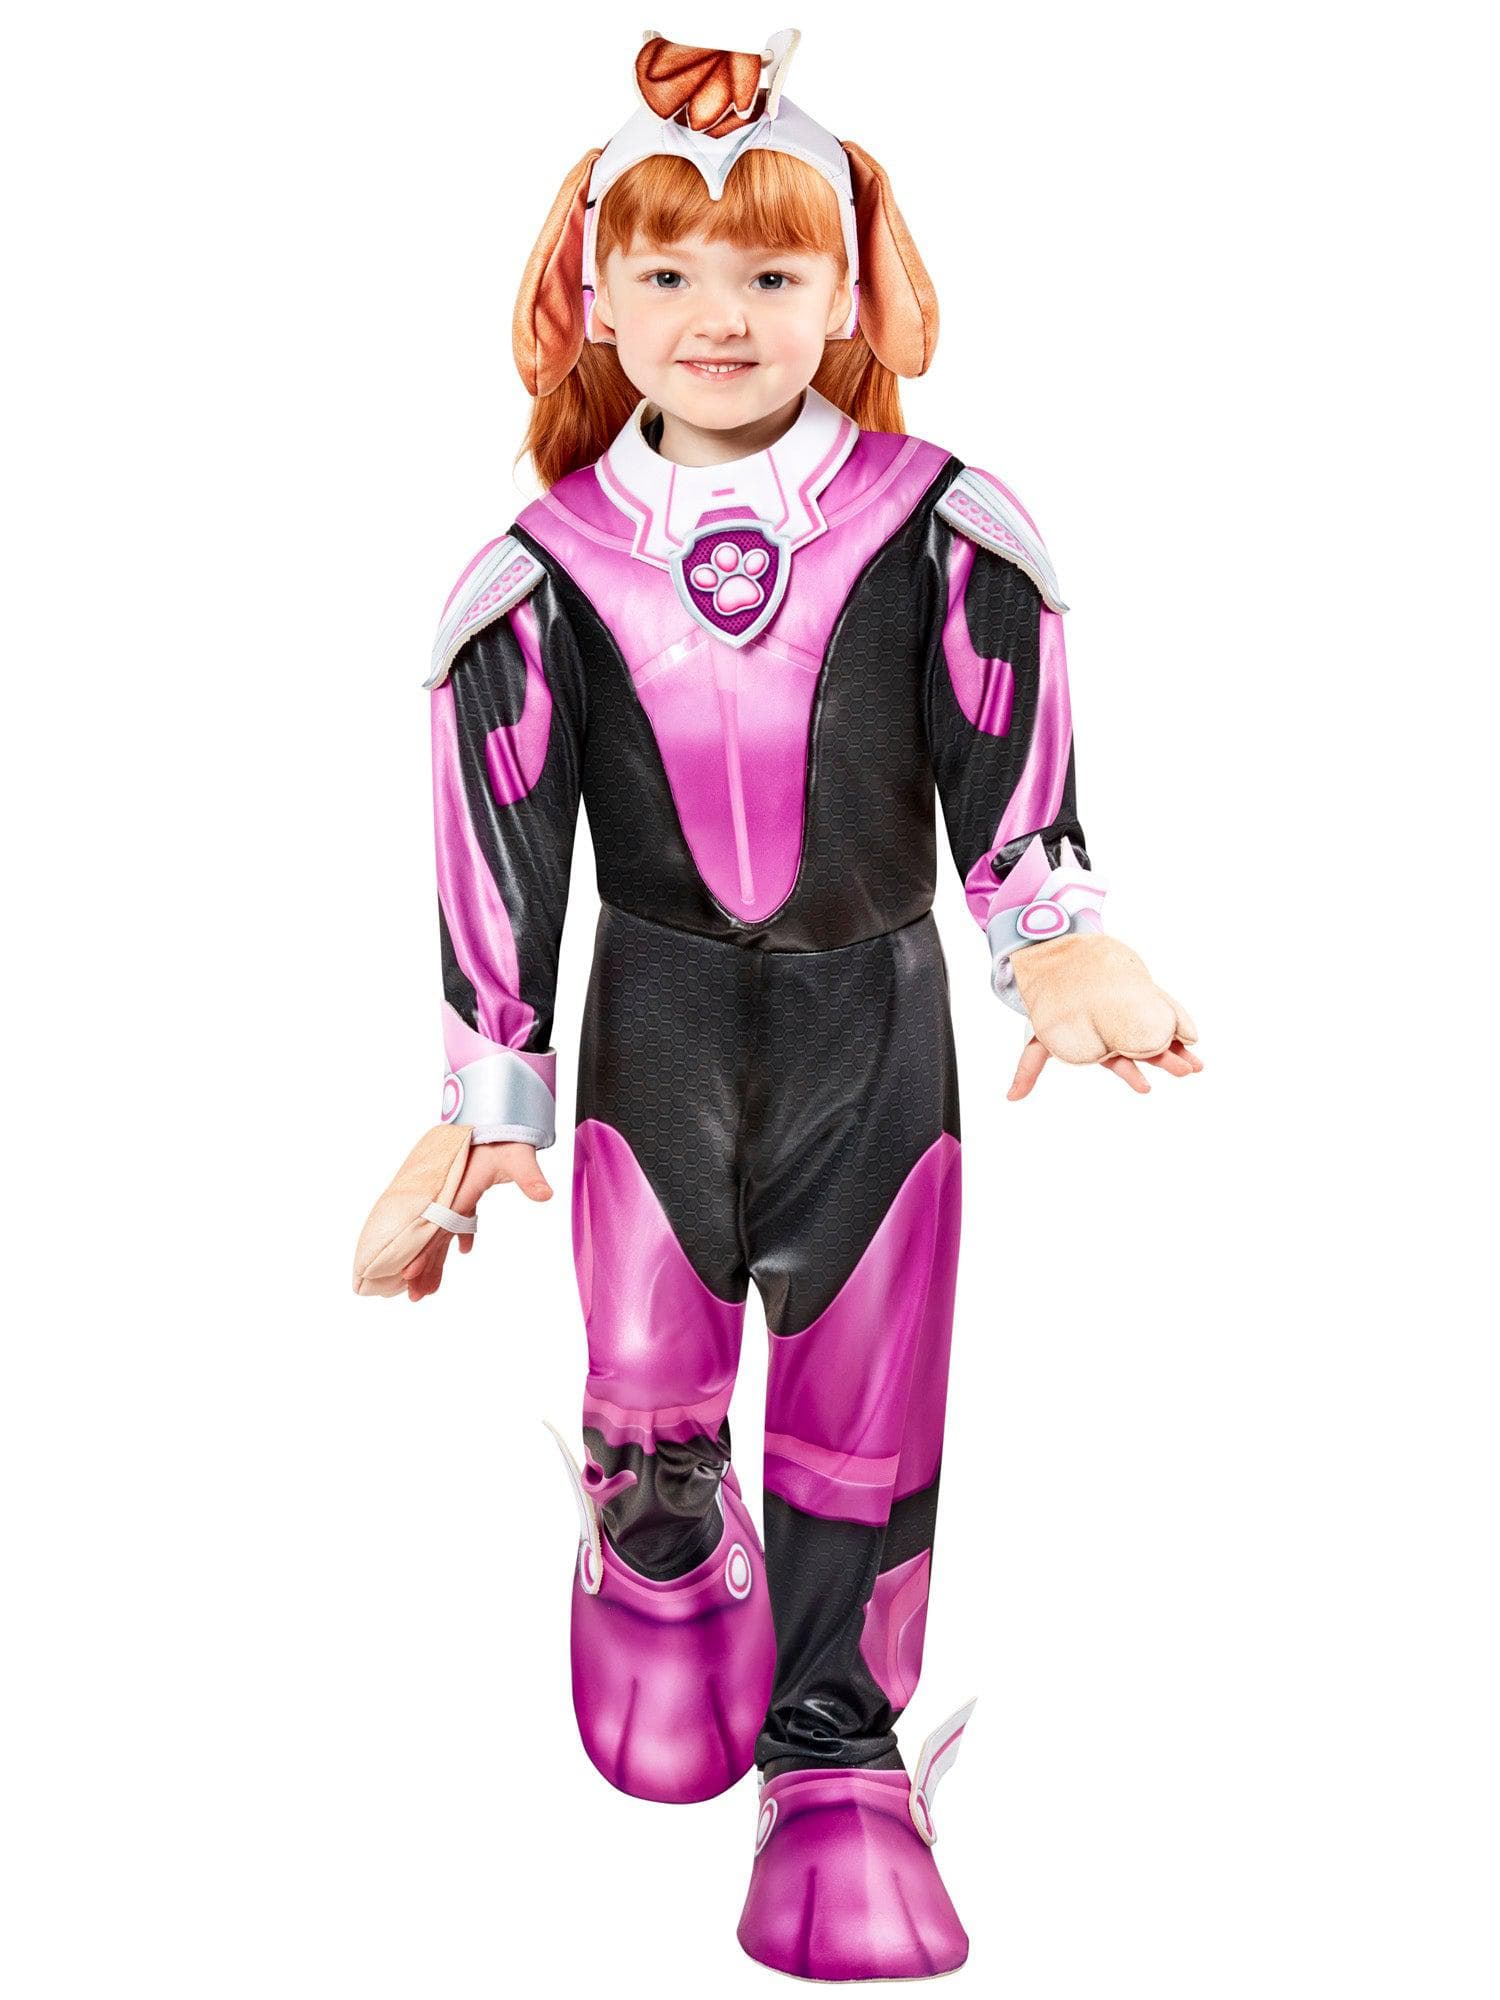 Paw Patrol 2 Mighty Skye Costume for Toddlers - costumes.com